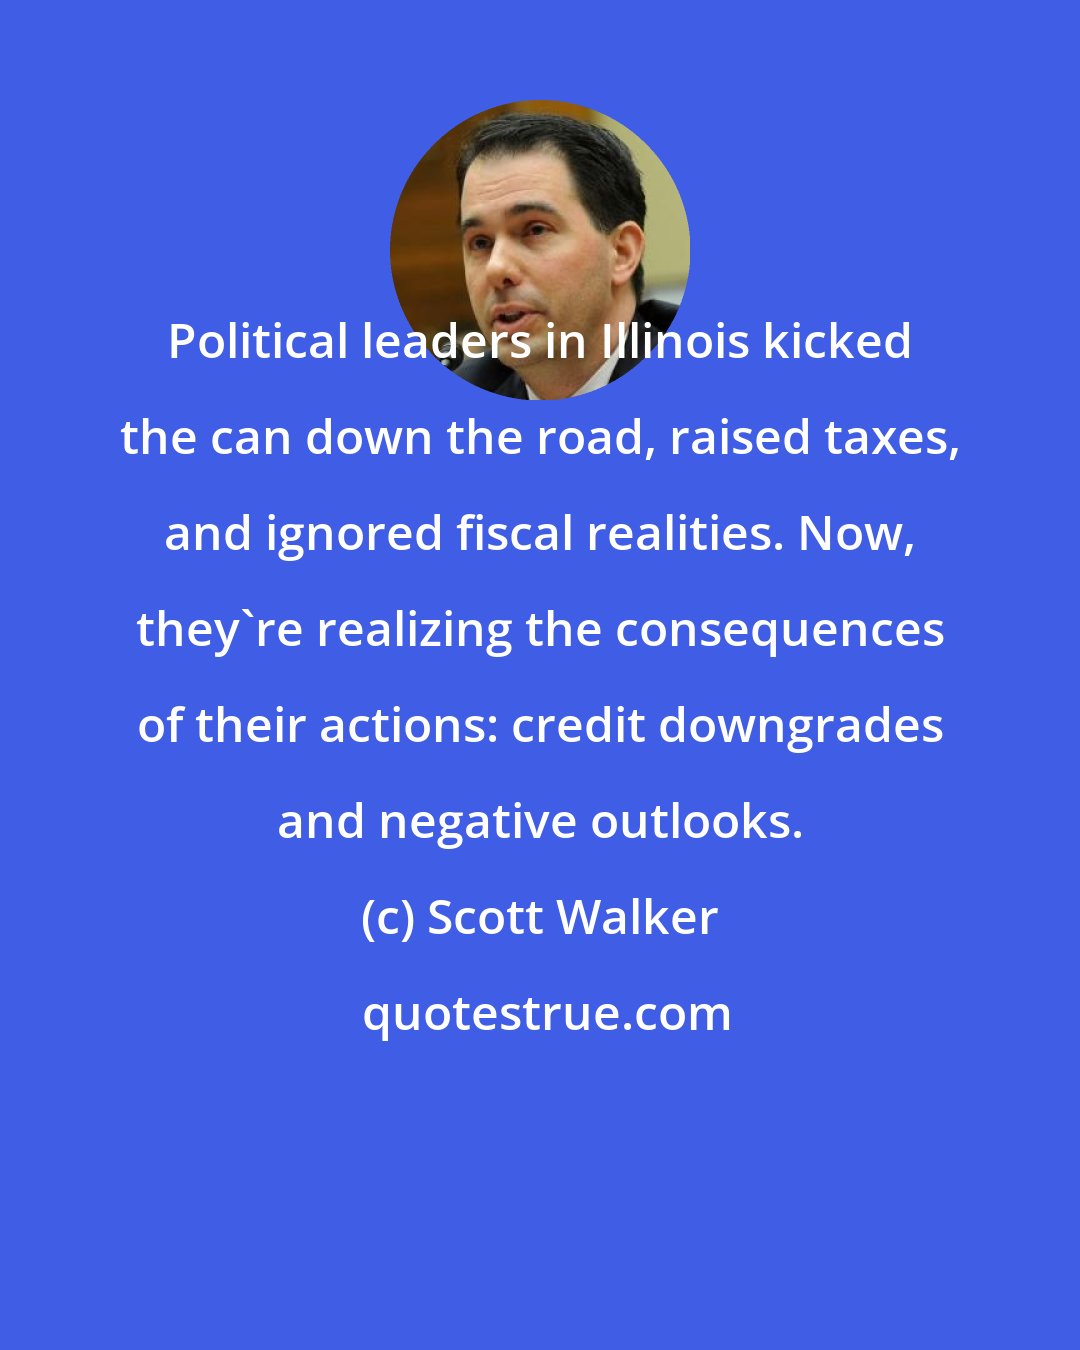 Scott Walker: Political leaders in Illinois kicked the can down the road, raised taxes, and ignored fiscal realities. Now, they're realizing the consequences of their actions: credit downgrades and negative outlooks.